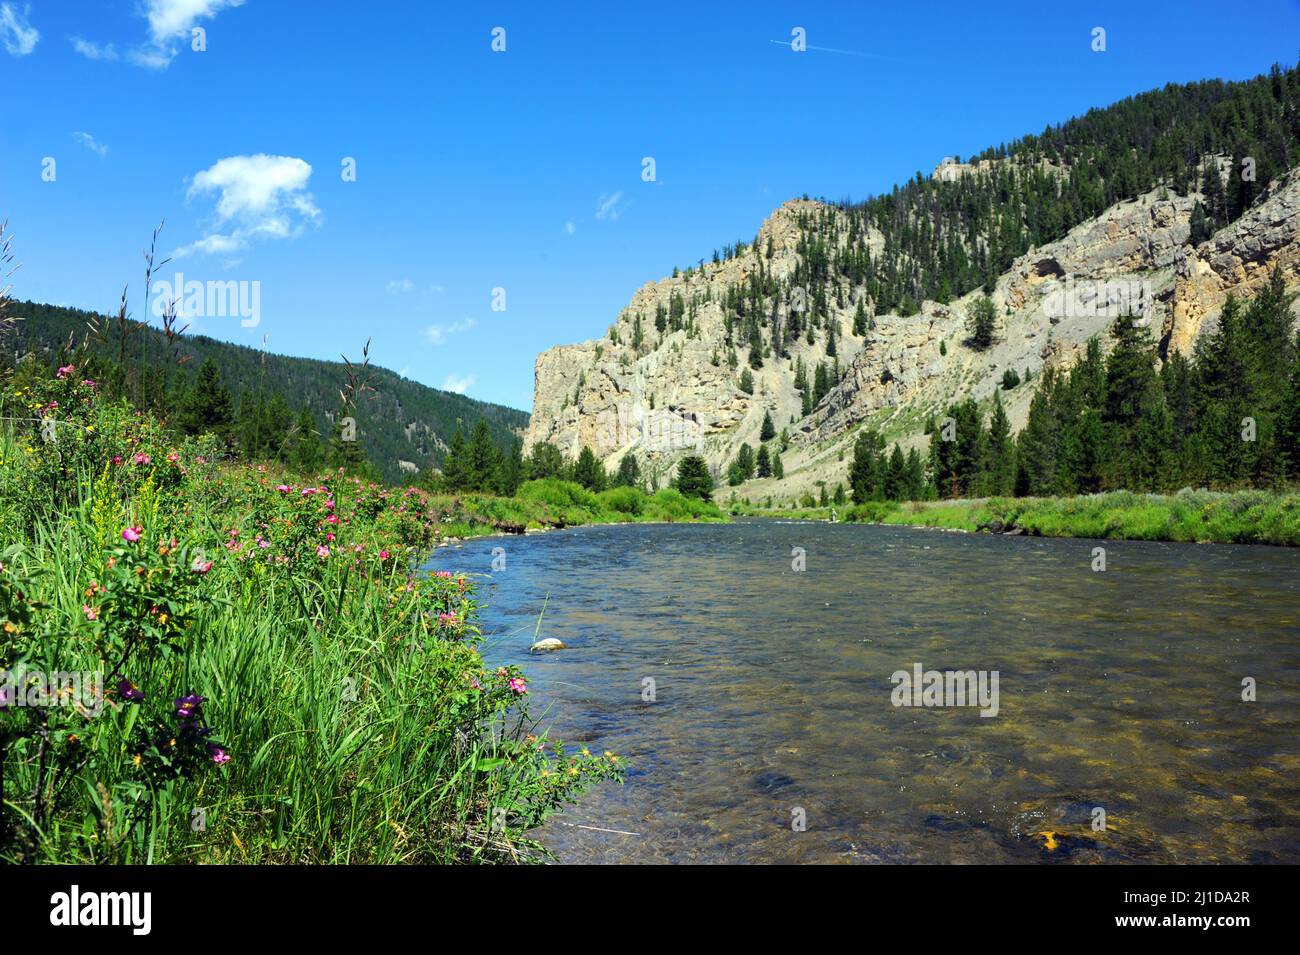 Distant Flyfisherman wades along the edge of the Gallatin River in the Gallatin Valley.  A bluff of the Gallatin Range of the Rocky Mountains overlook Stock Photo